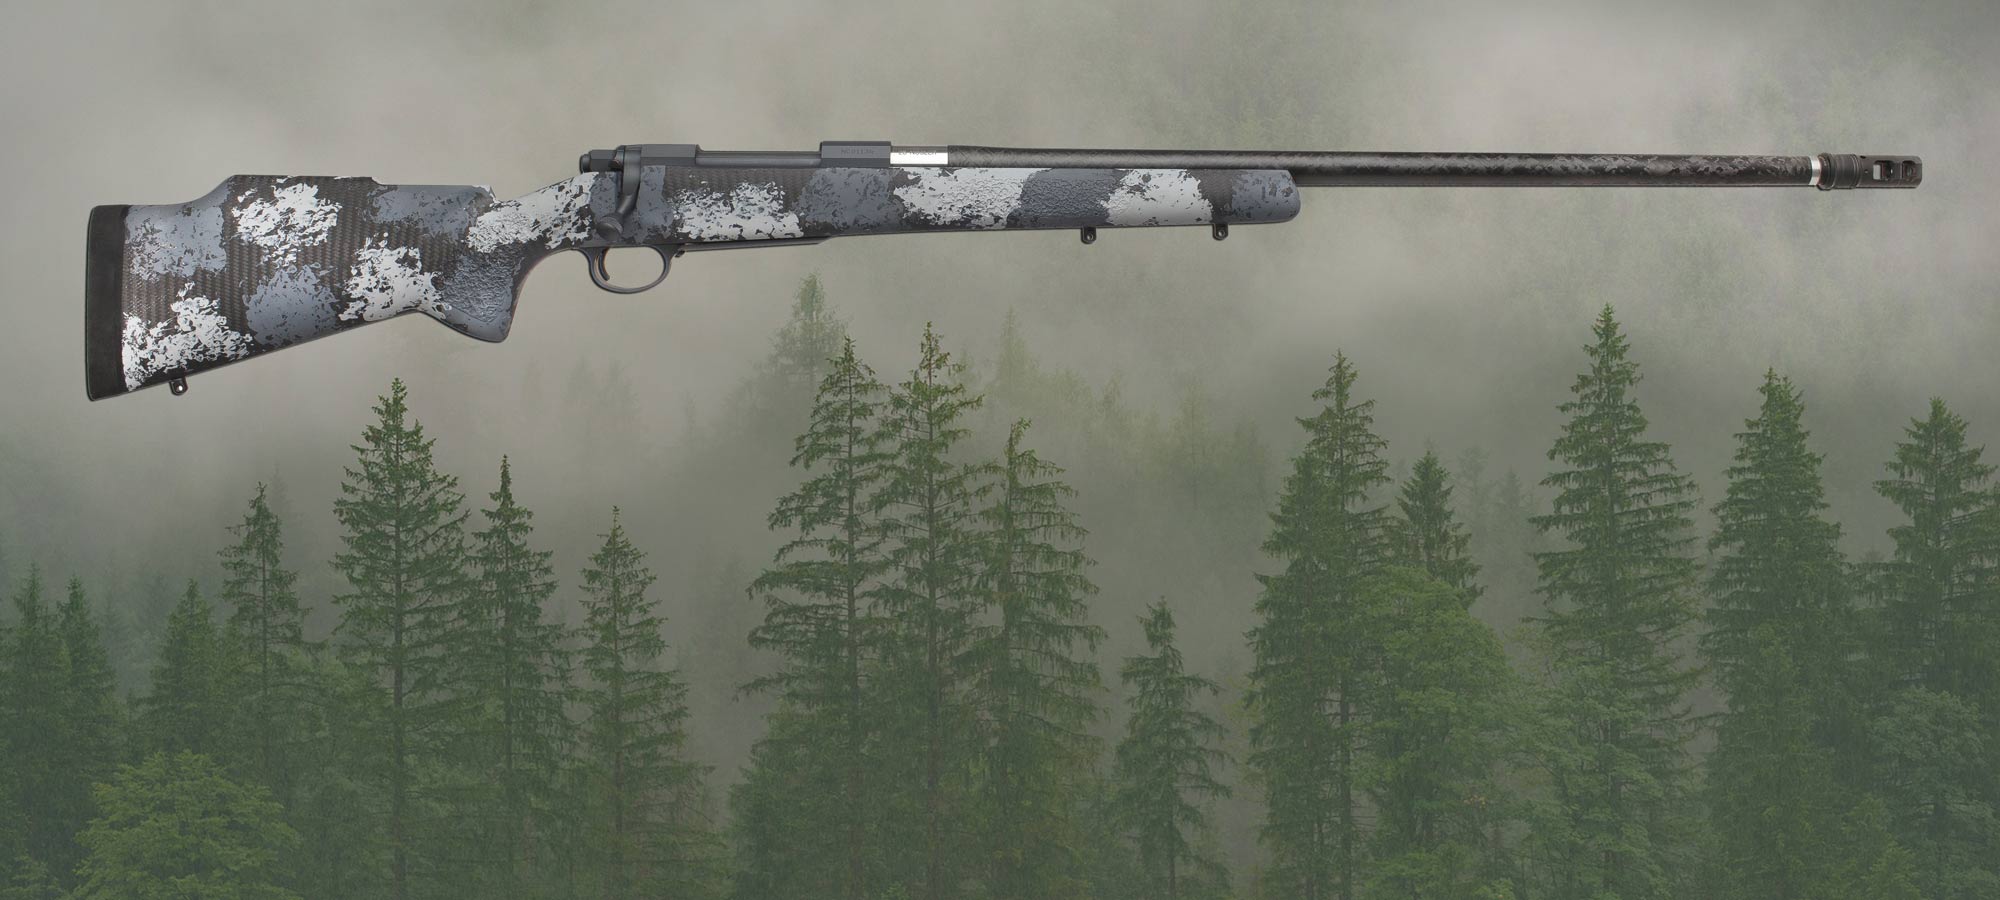 great backcountry rifles from SHOT show